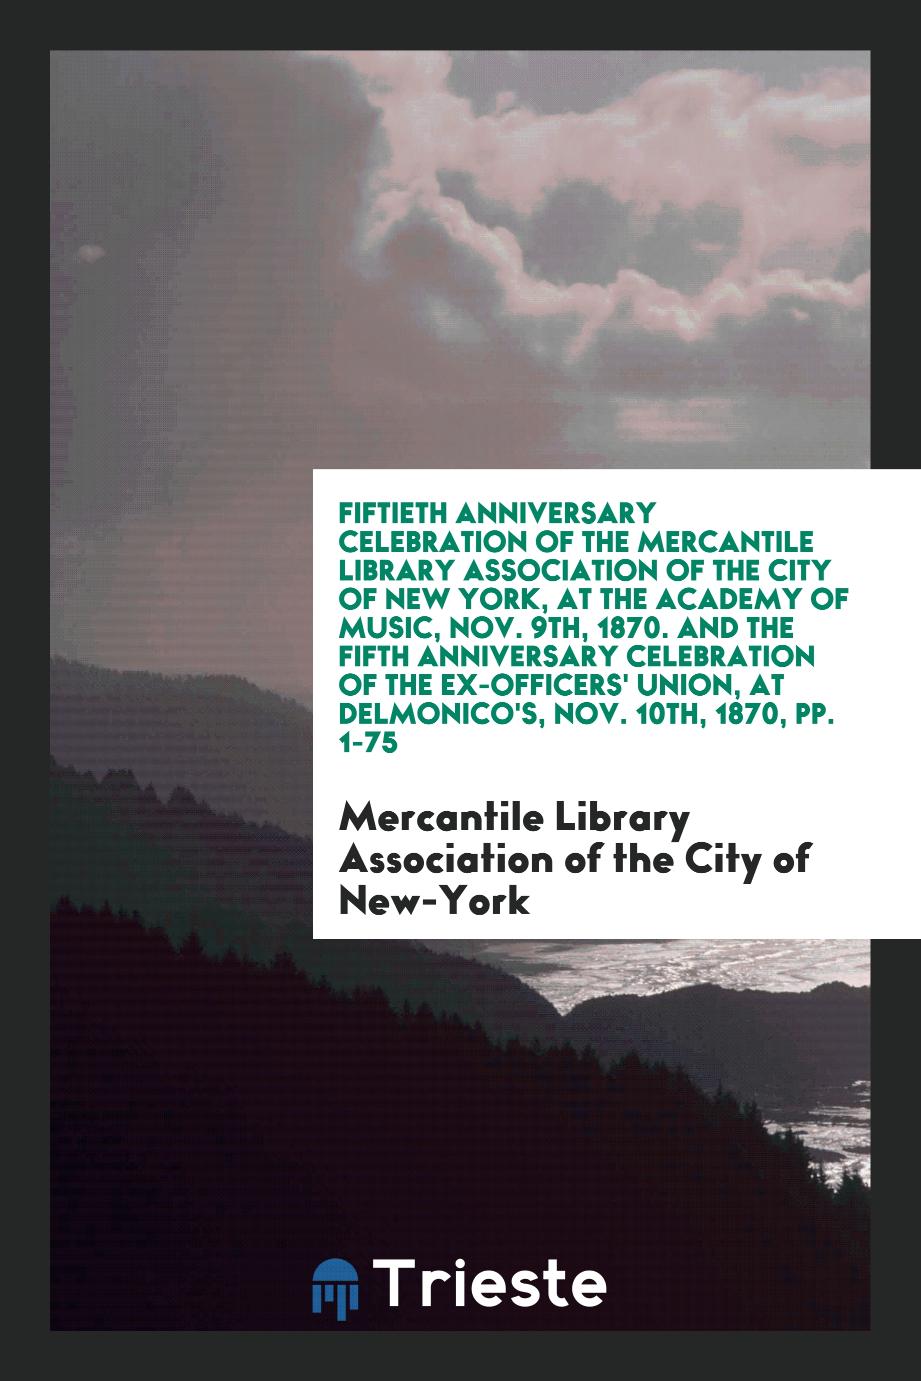 Fiftieth Anniversary Celebration of the Mercantile Library Association of the City of New York, at the Academy of Music, Nov. 9th, 1870. And the Fifth Anniversary Celebration of the Ex-Officers' Union, at Delmonico's, Nov. 10th, 1870, pp. 1-75